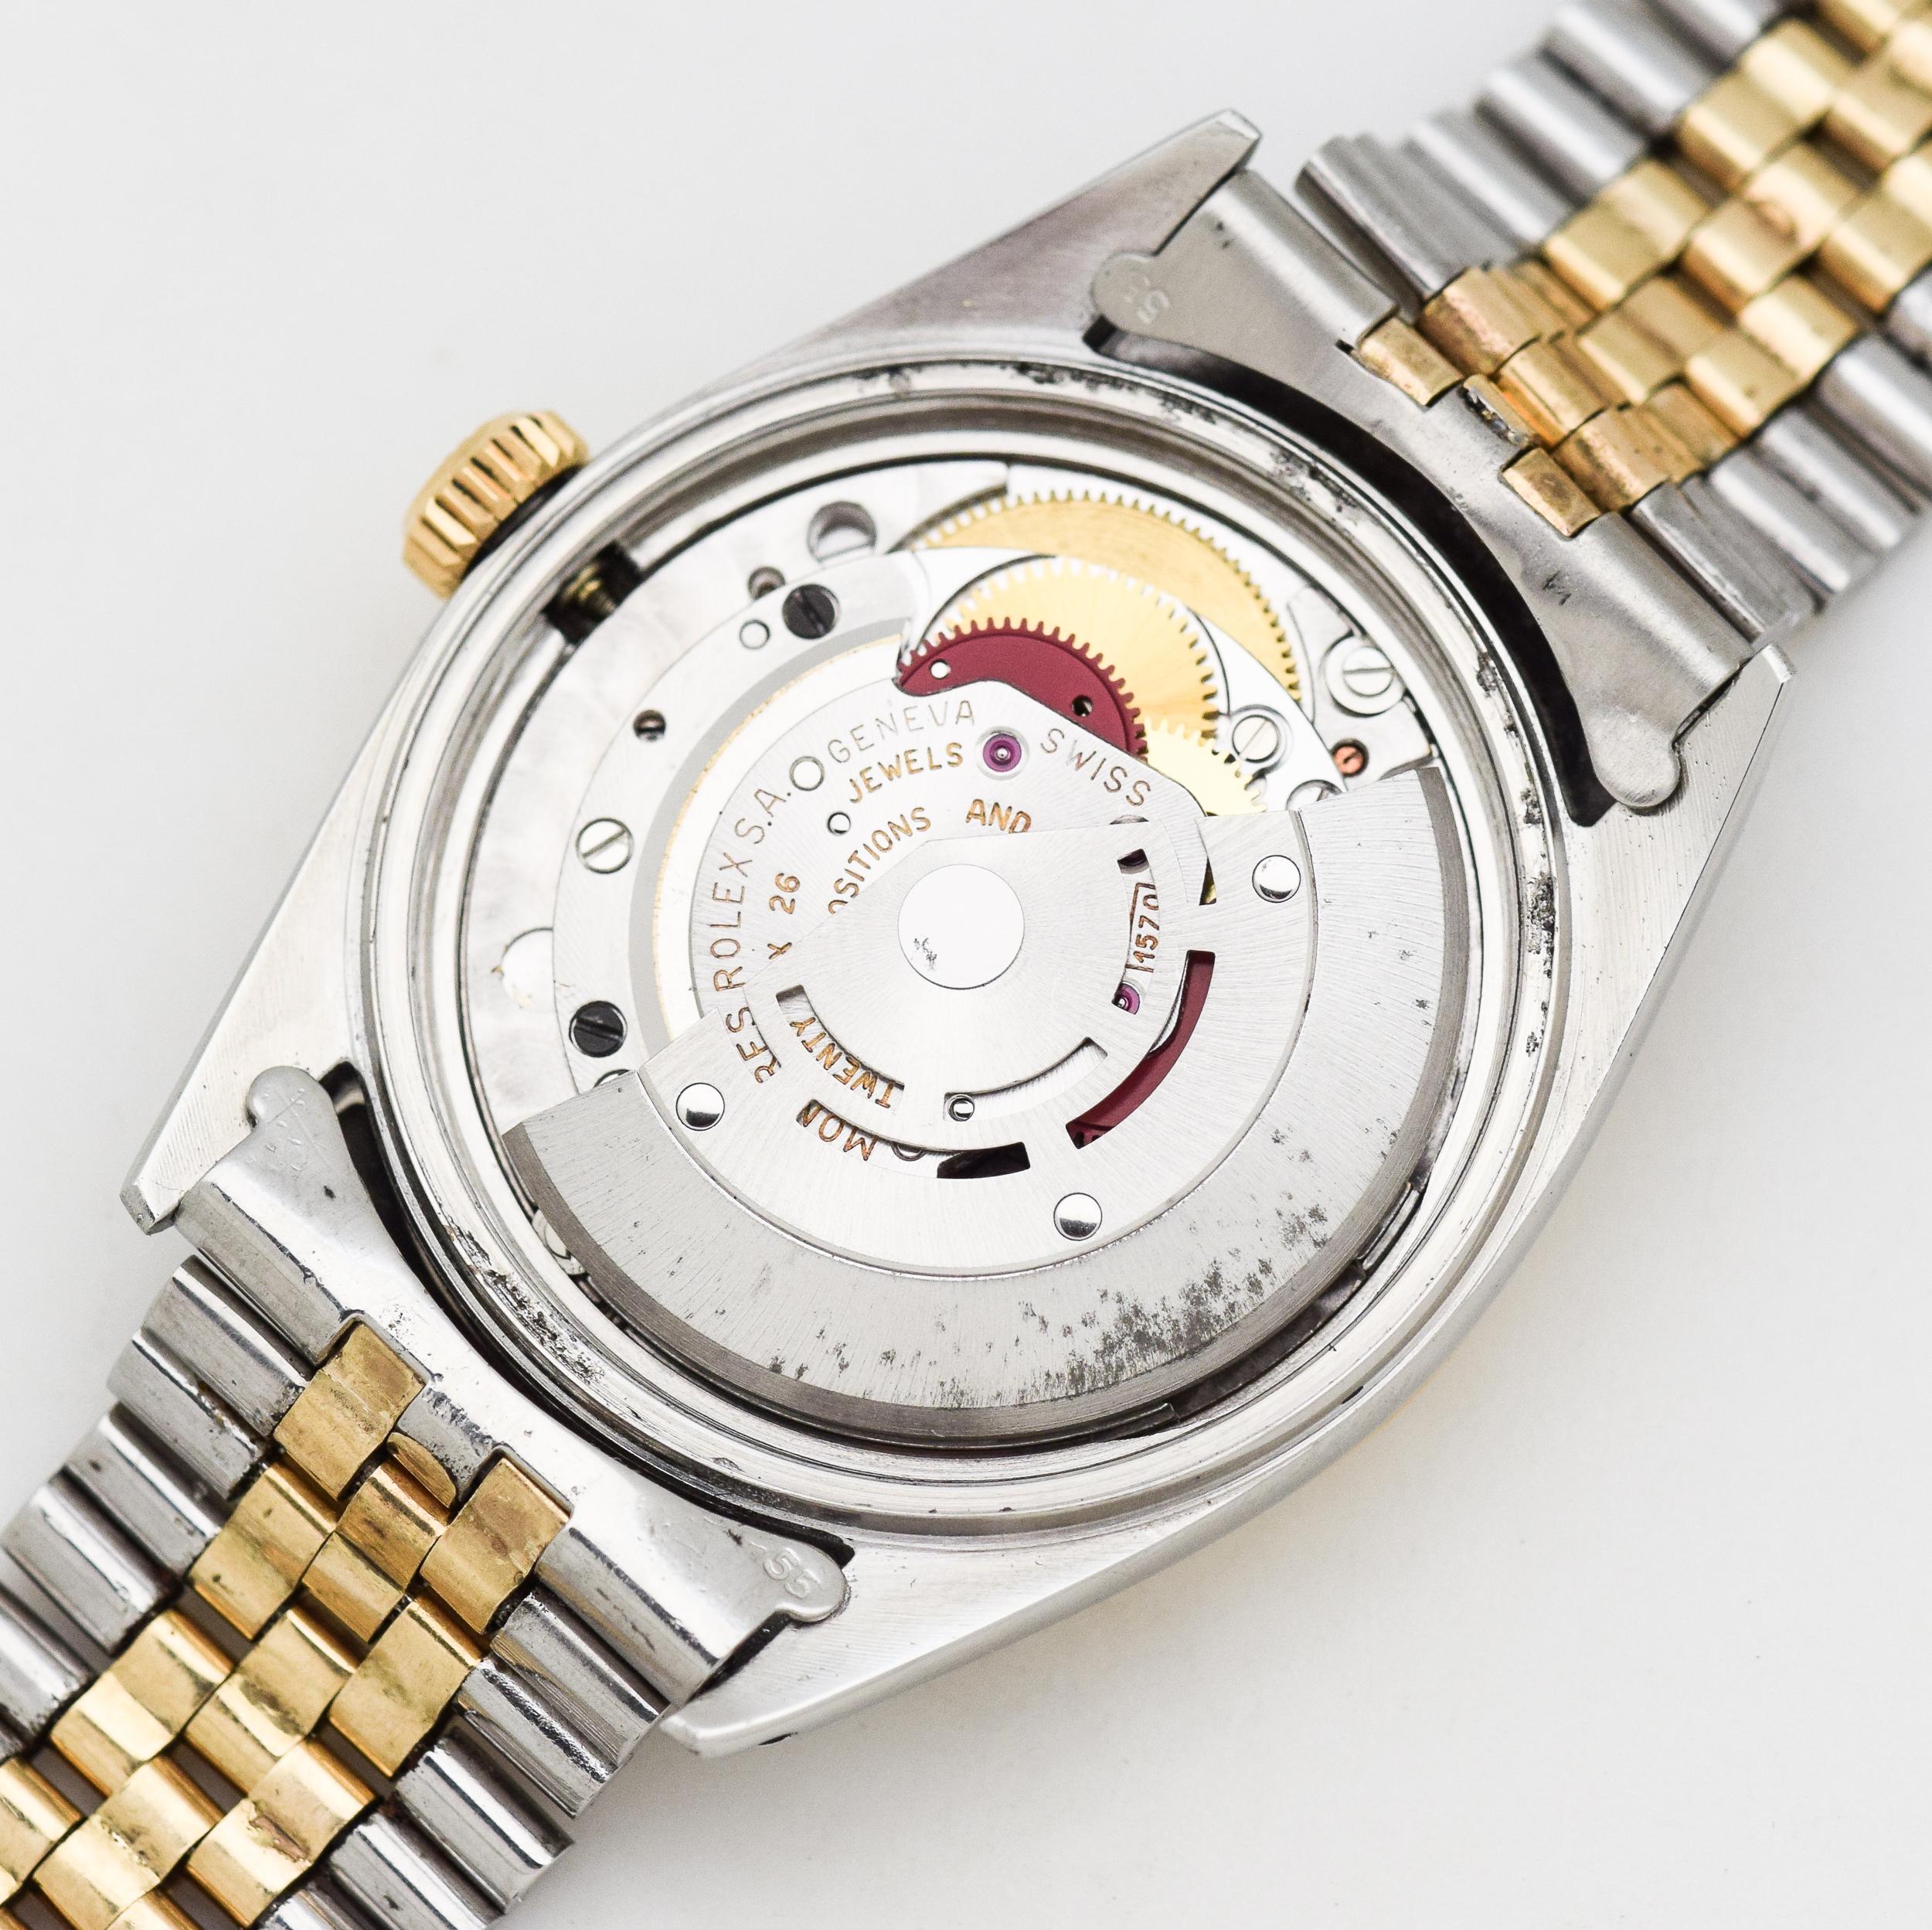 Vintage Rolex Datejust Reference 1601 Two-Tone Watch, 1967 5